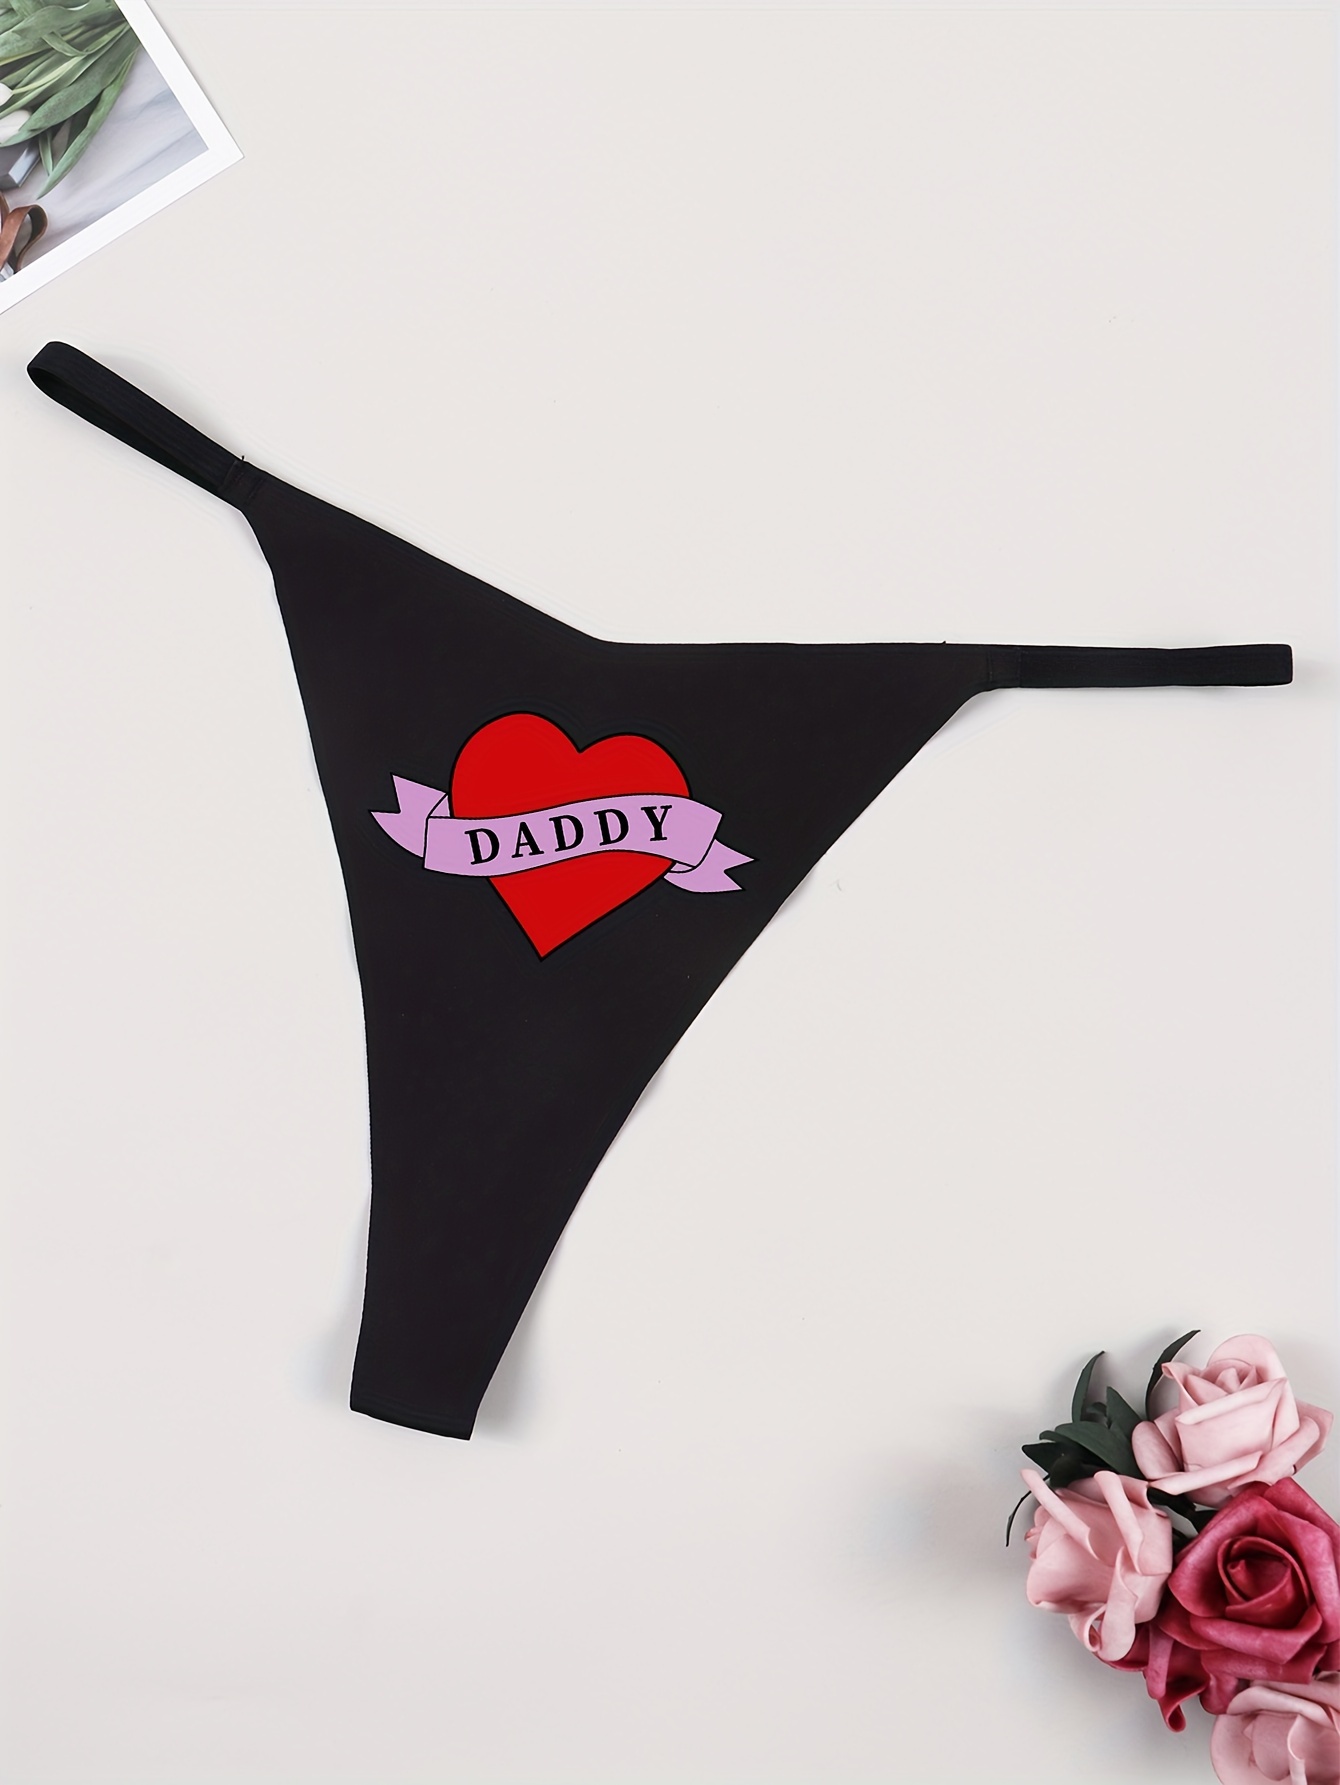  Womens Love Heart Print Ladies Underwear Panties Personalized G  String Low Waist Thongs Shapewear Cutout Breathable Black : Clothing, Shoes  & Jewelry